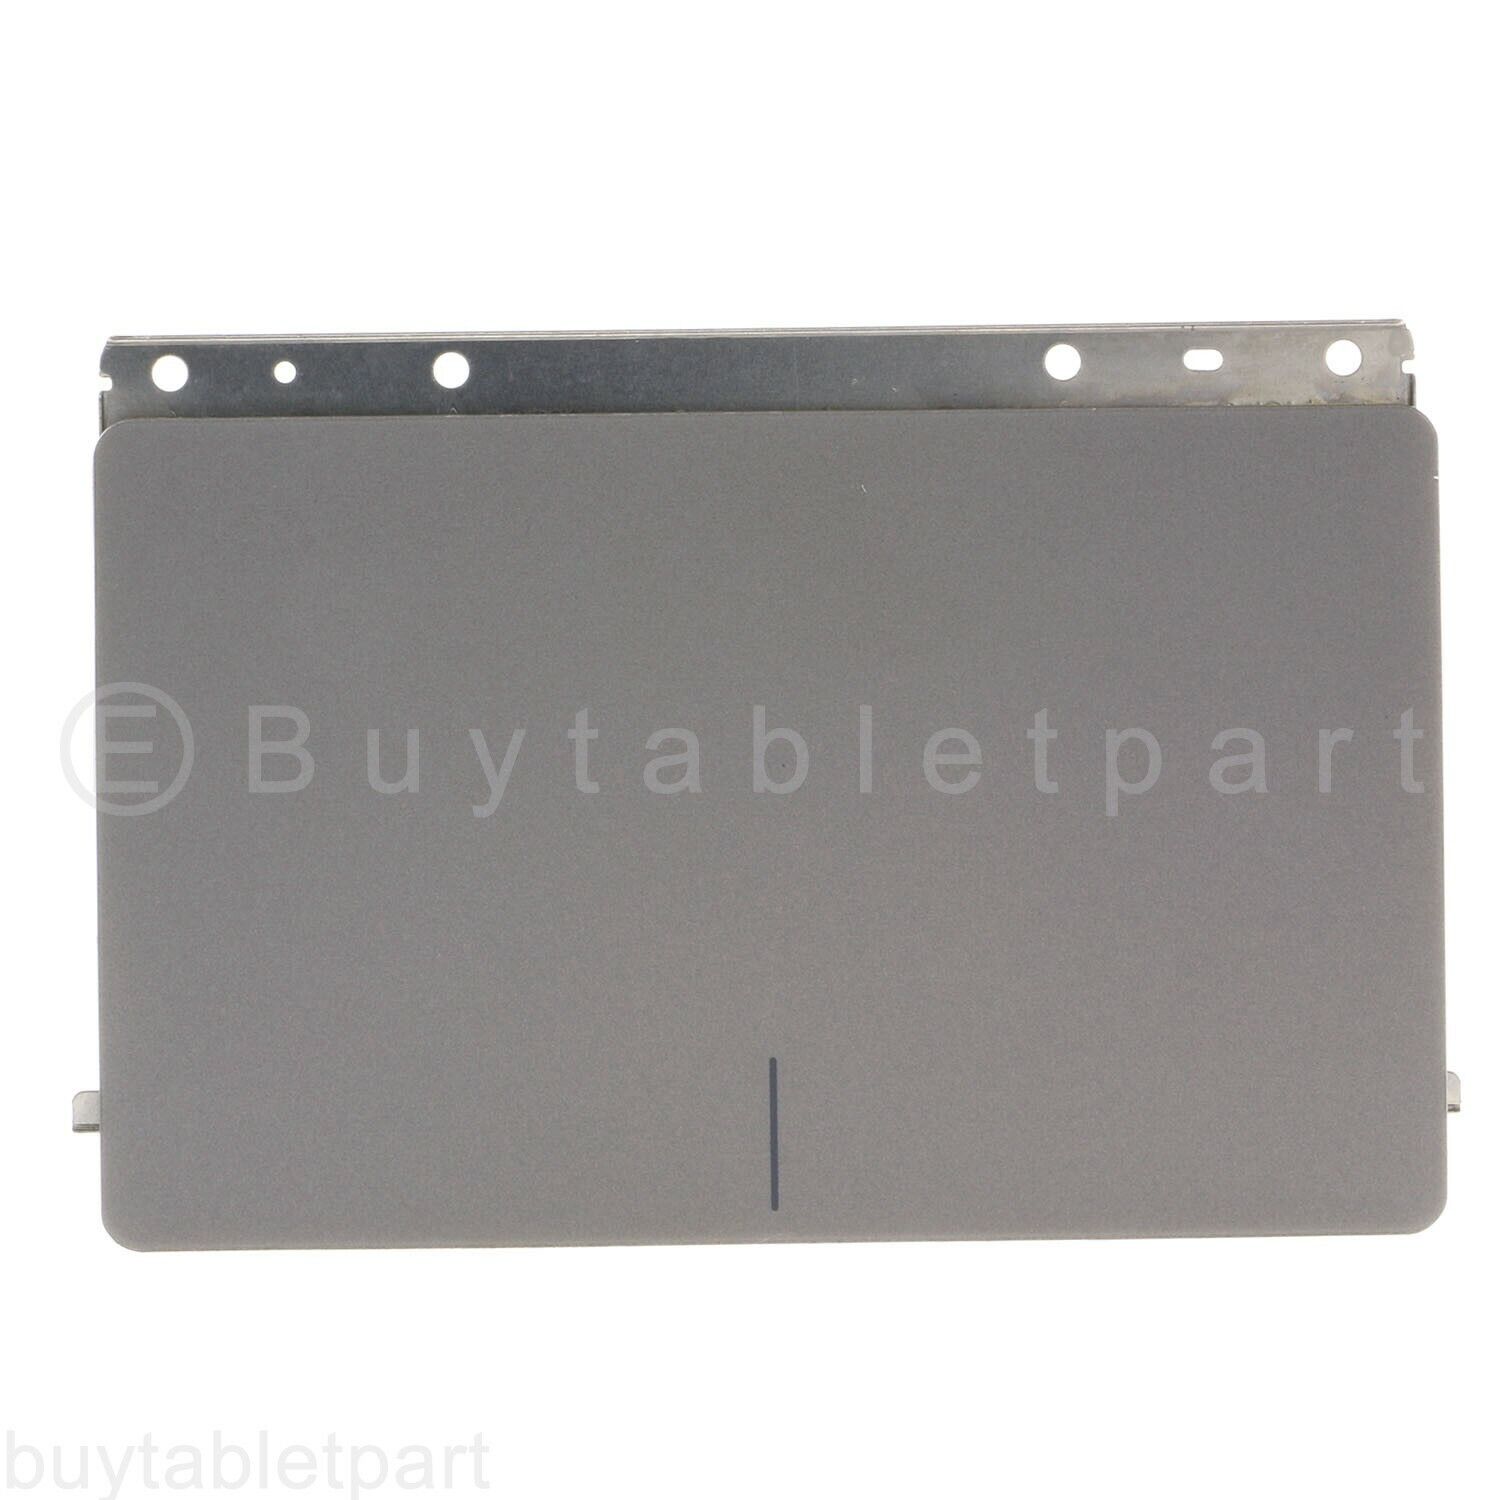 NEW TRACKPAD TOUCHPAD NO CABLE For Dell Inspiron 13 5368 5378 5379 7368 7375